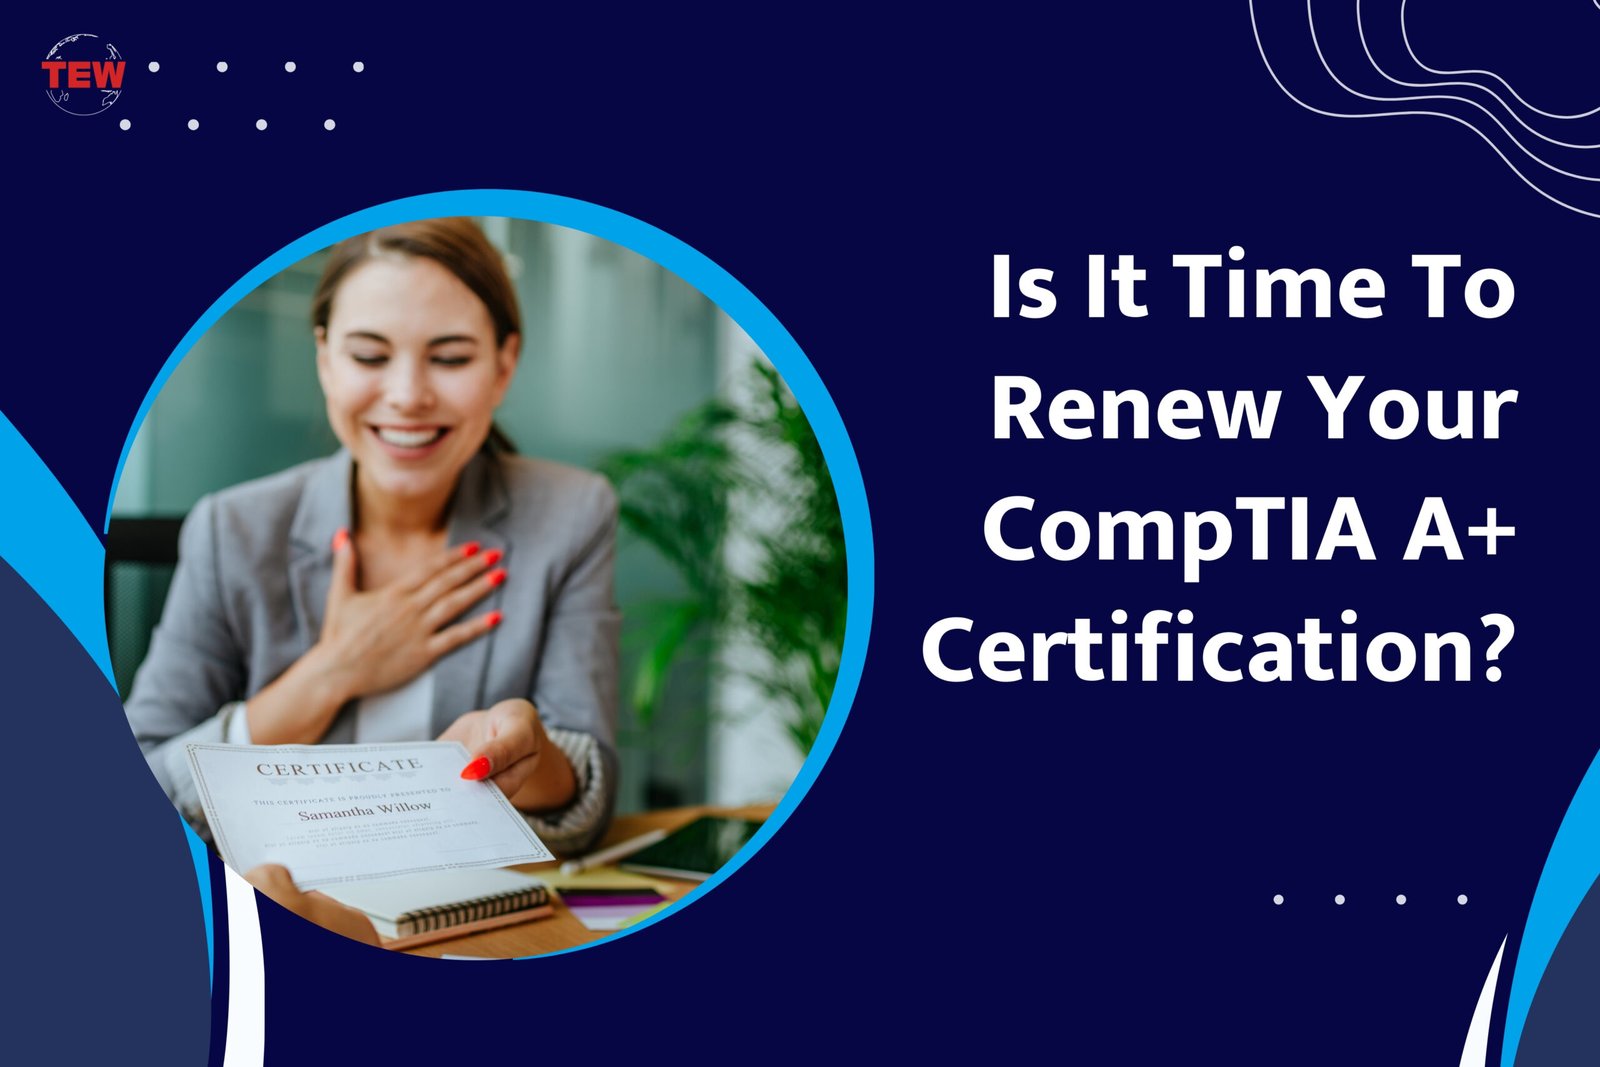 Is It Time To Renew Your CompTIA A+ Certification?